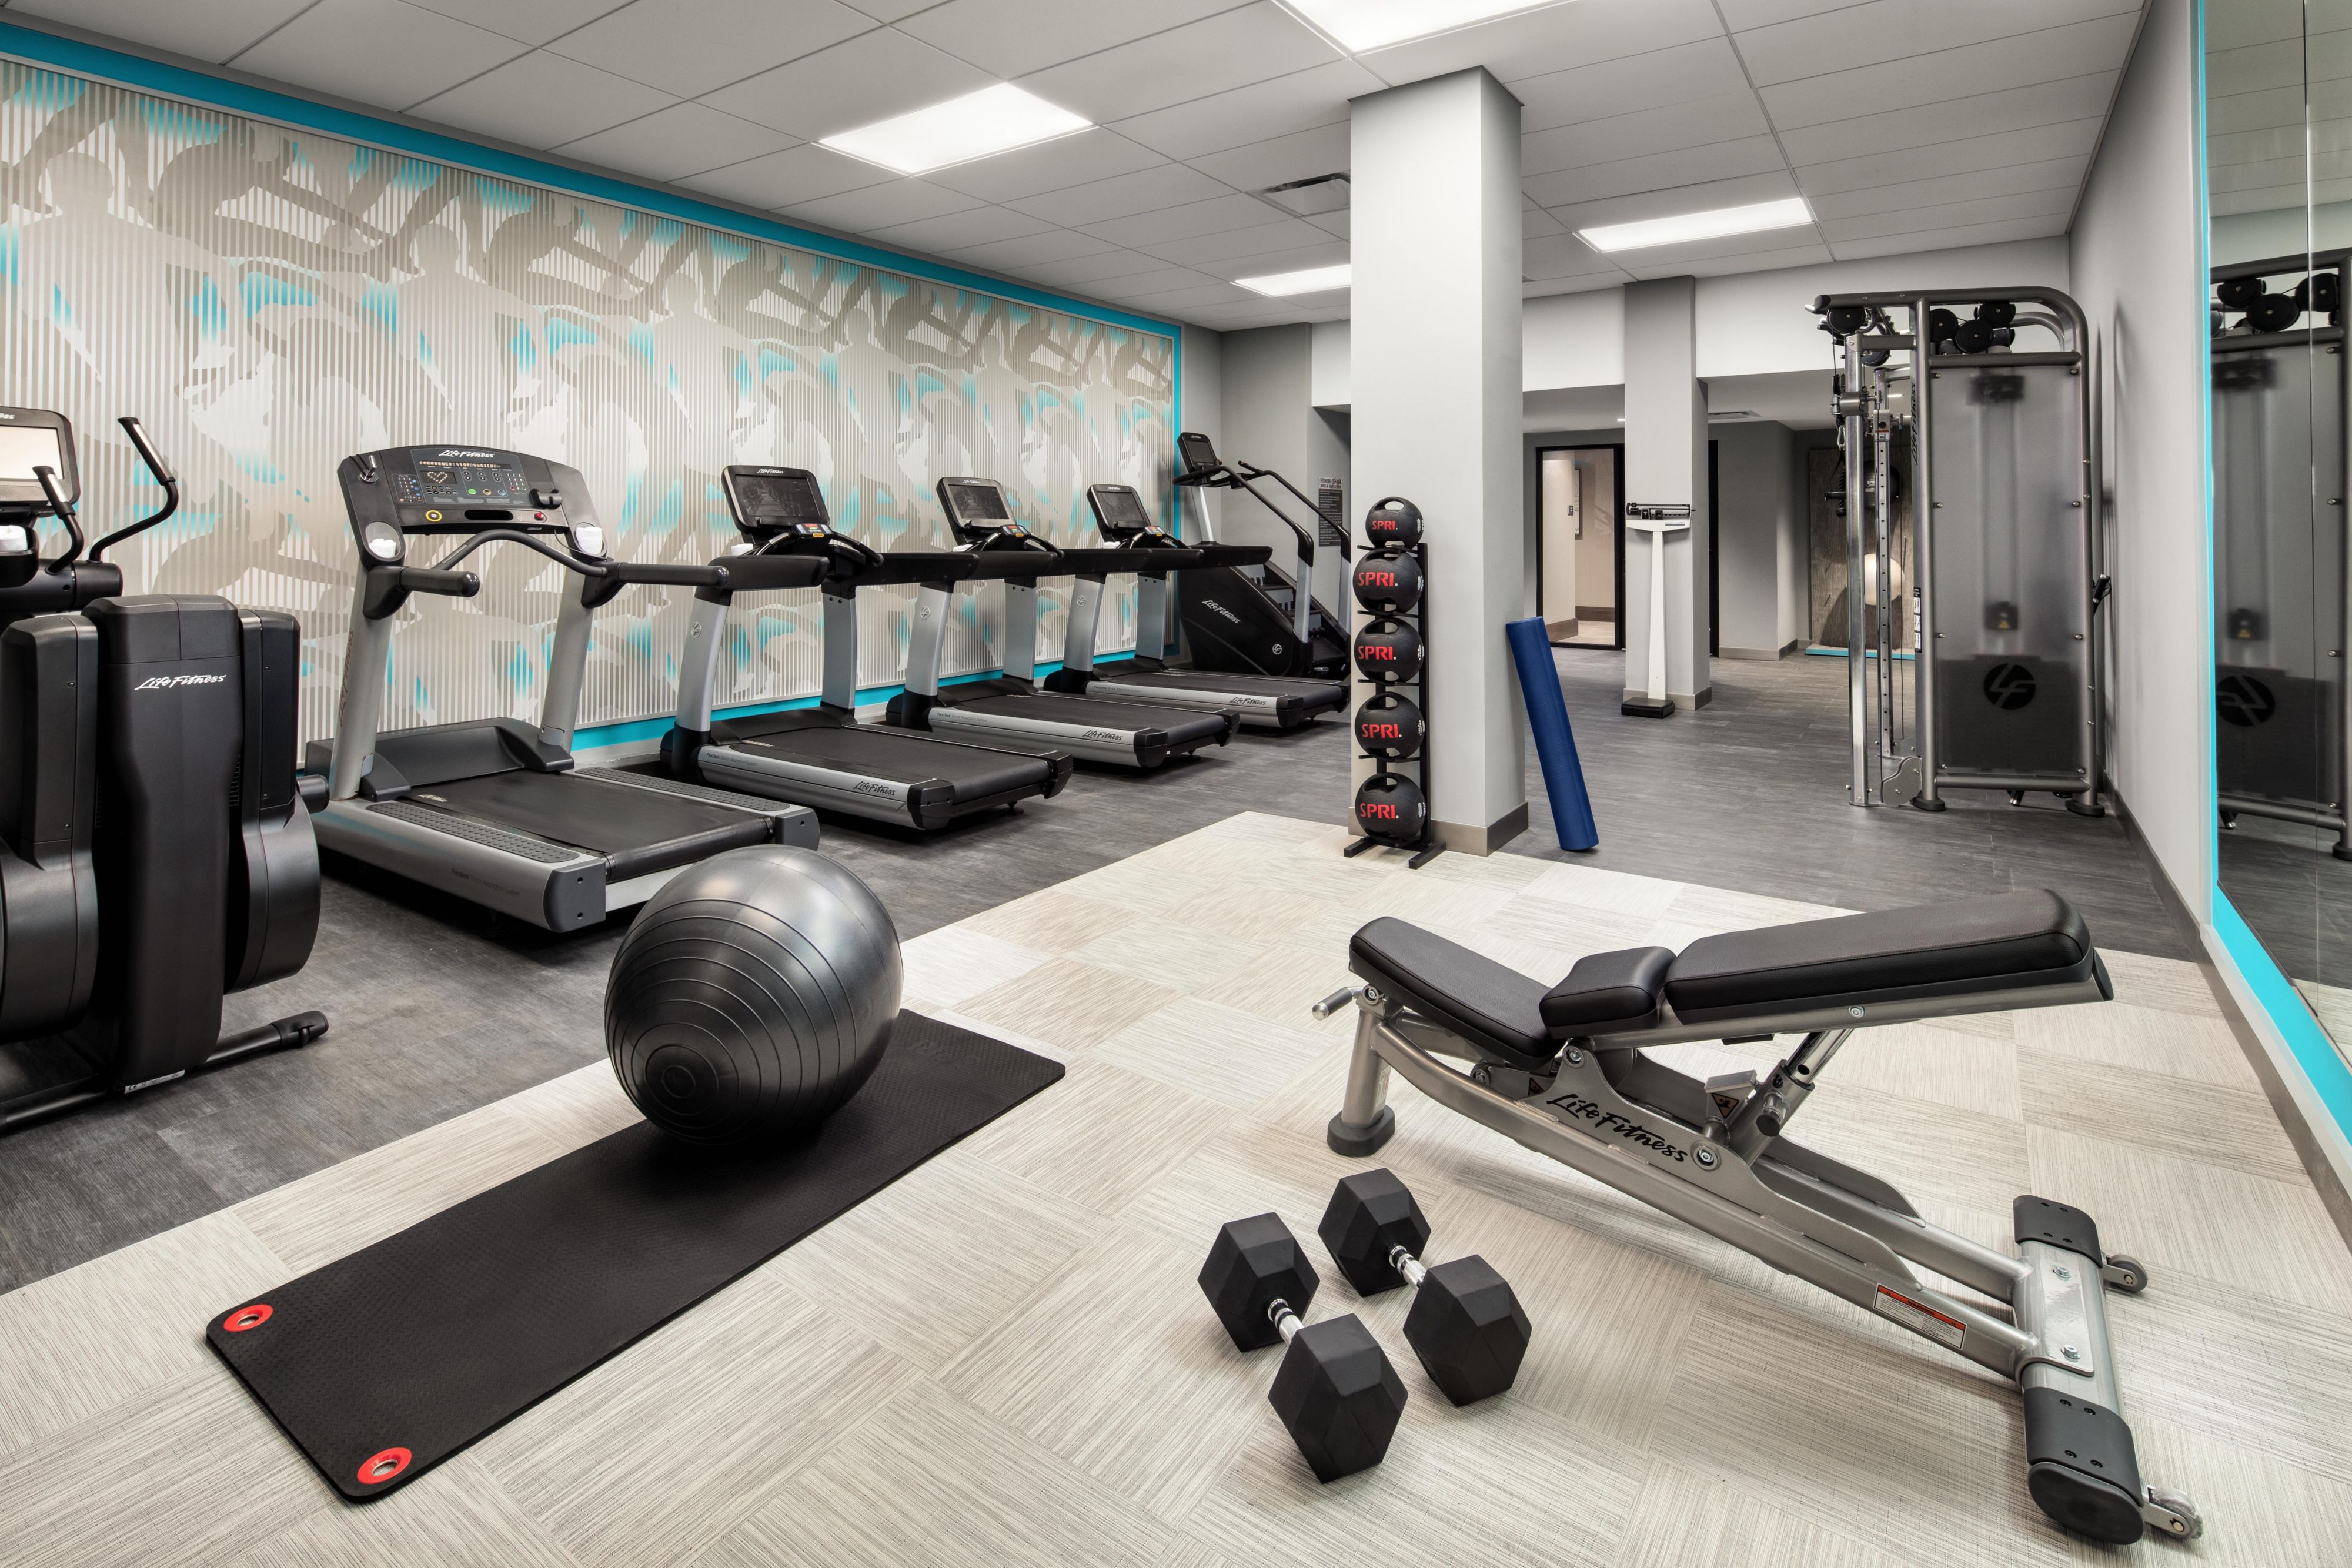 Stimulate your mind and body at our new fitness center.